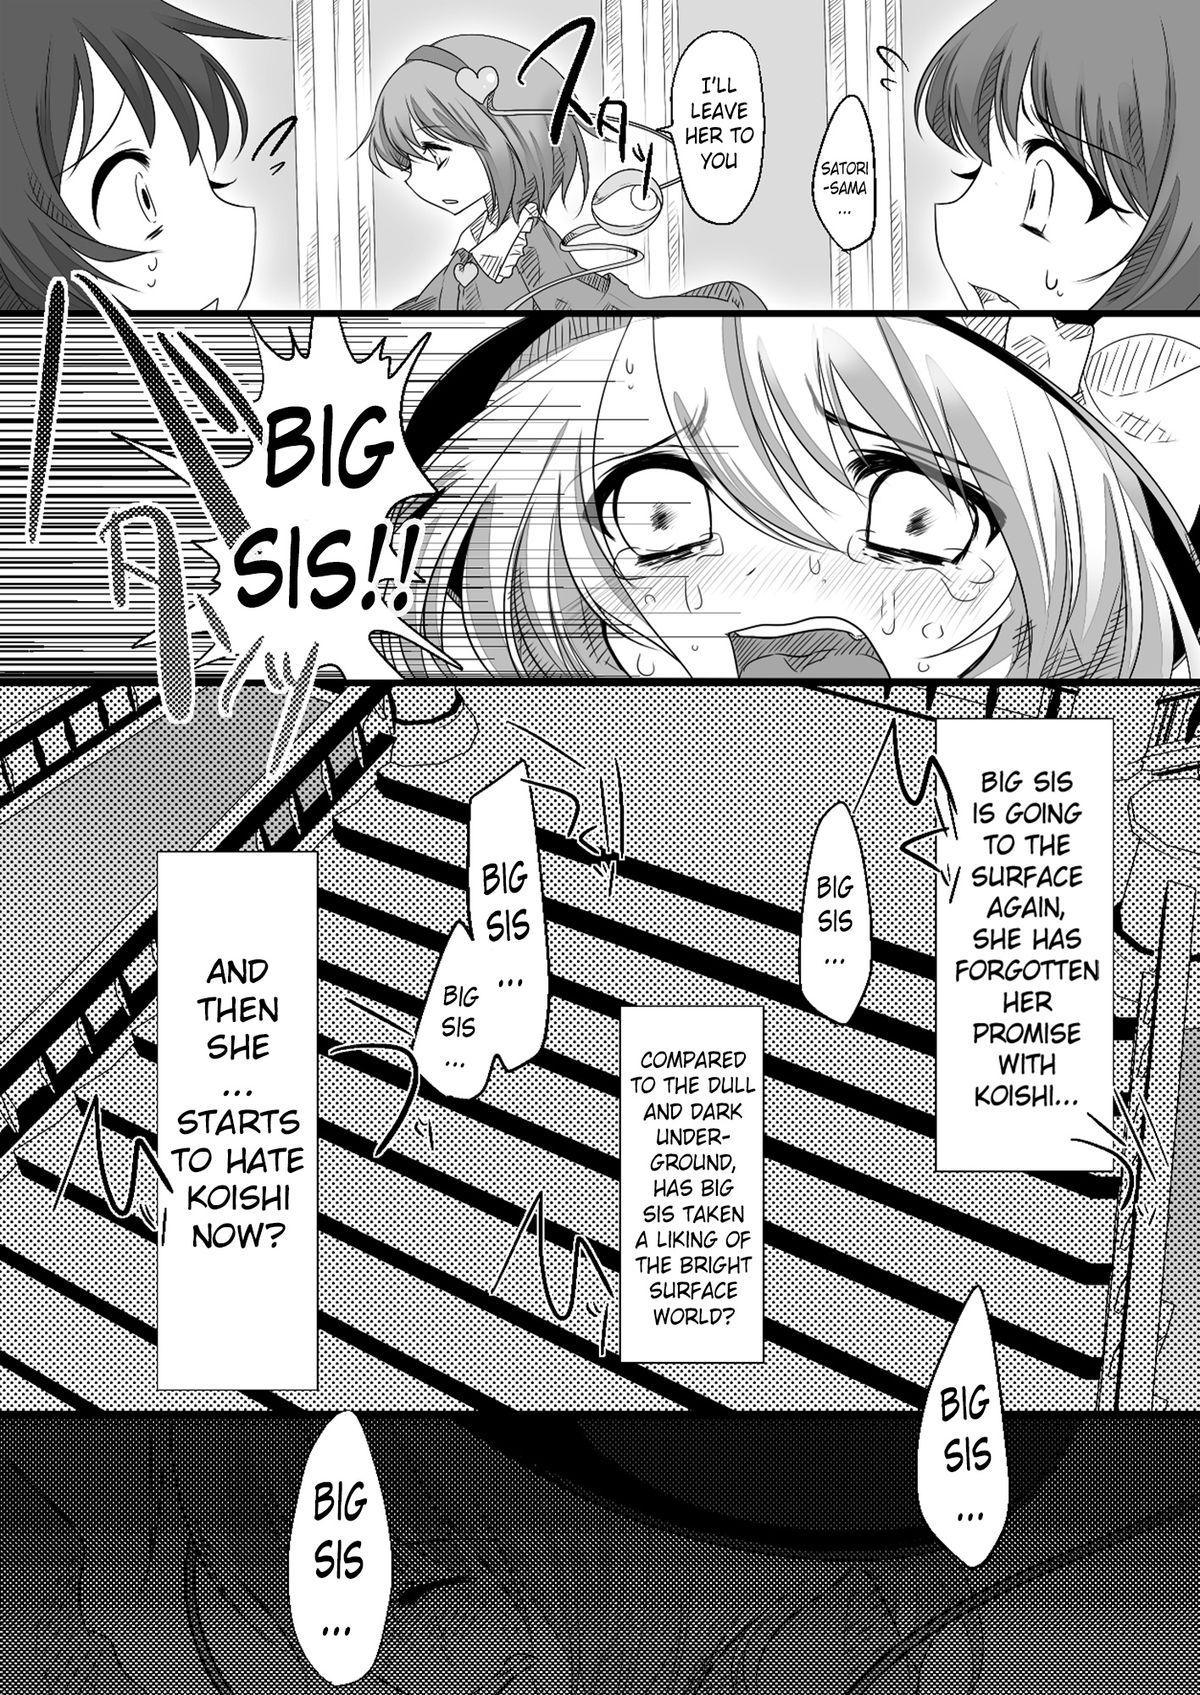 Bro The greatest hate springs from the greatest love - Touhou project Dorm - Page 6